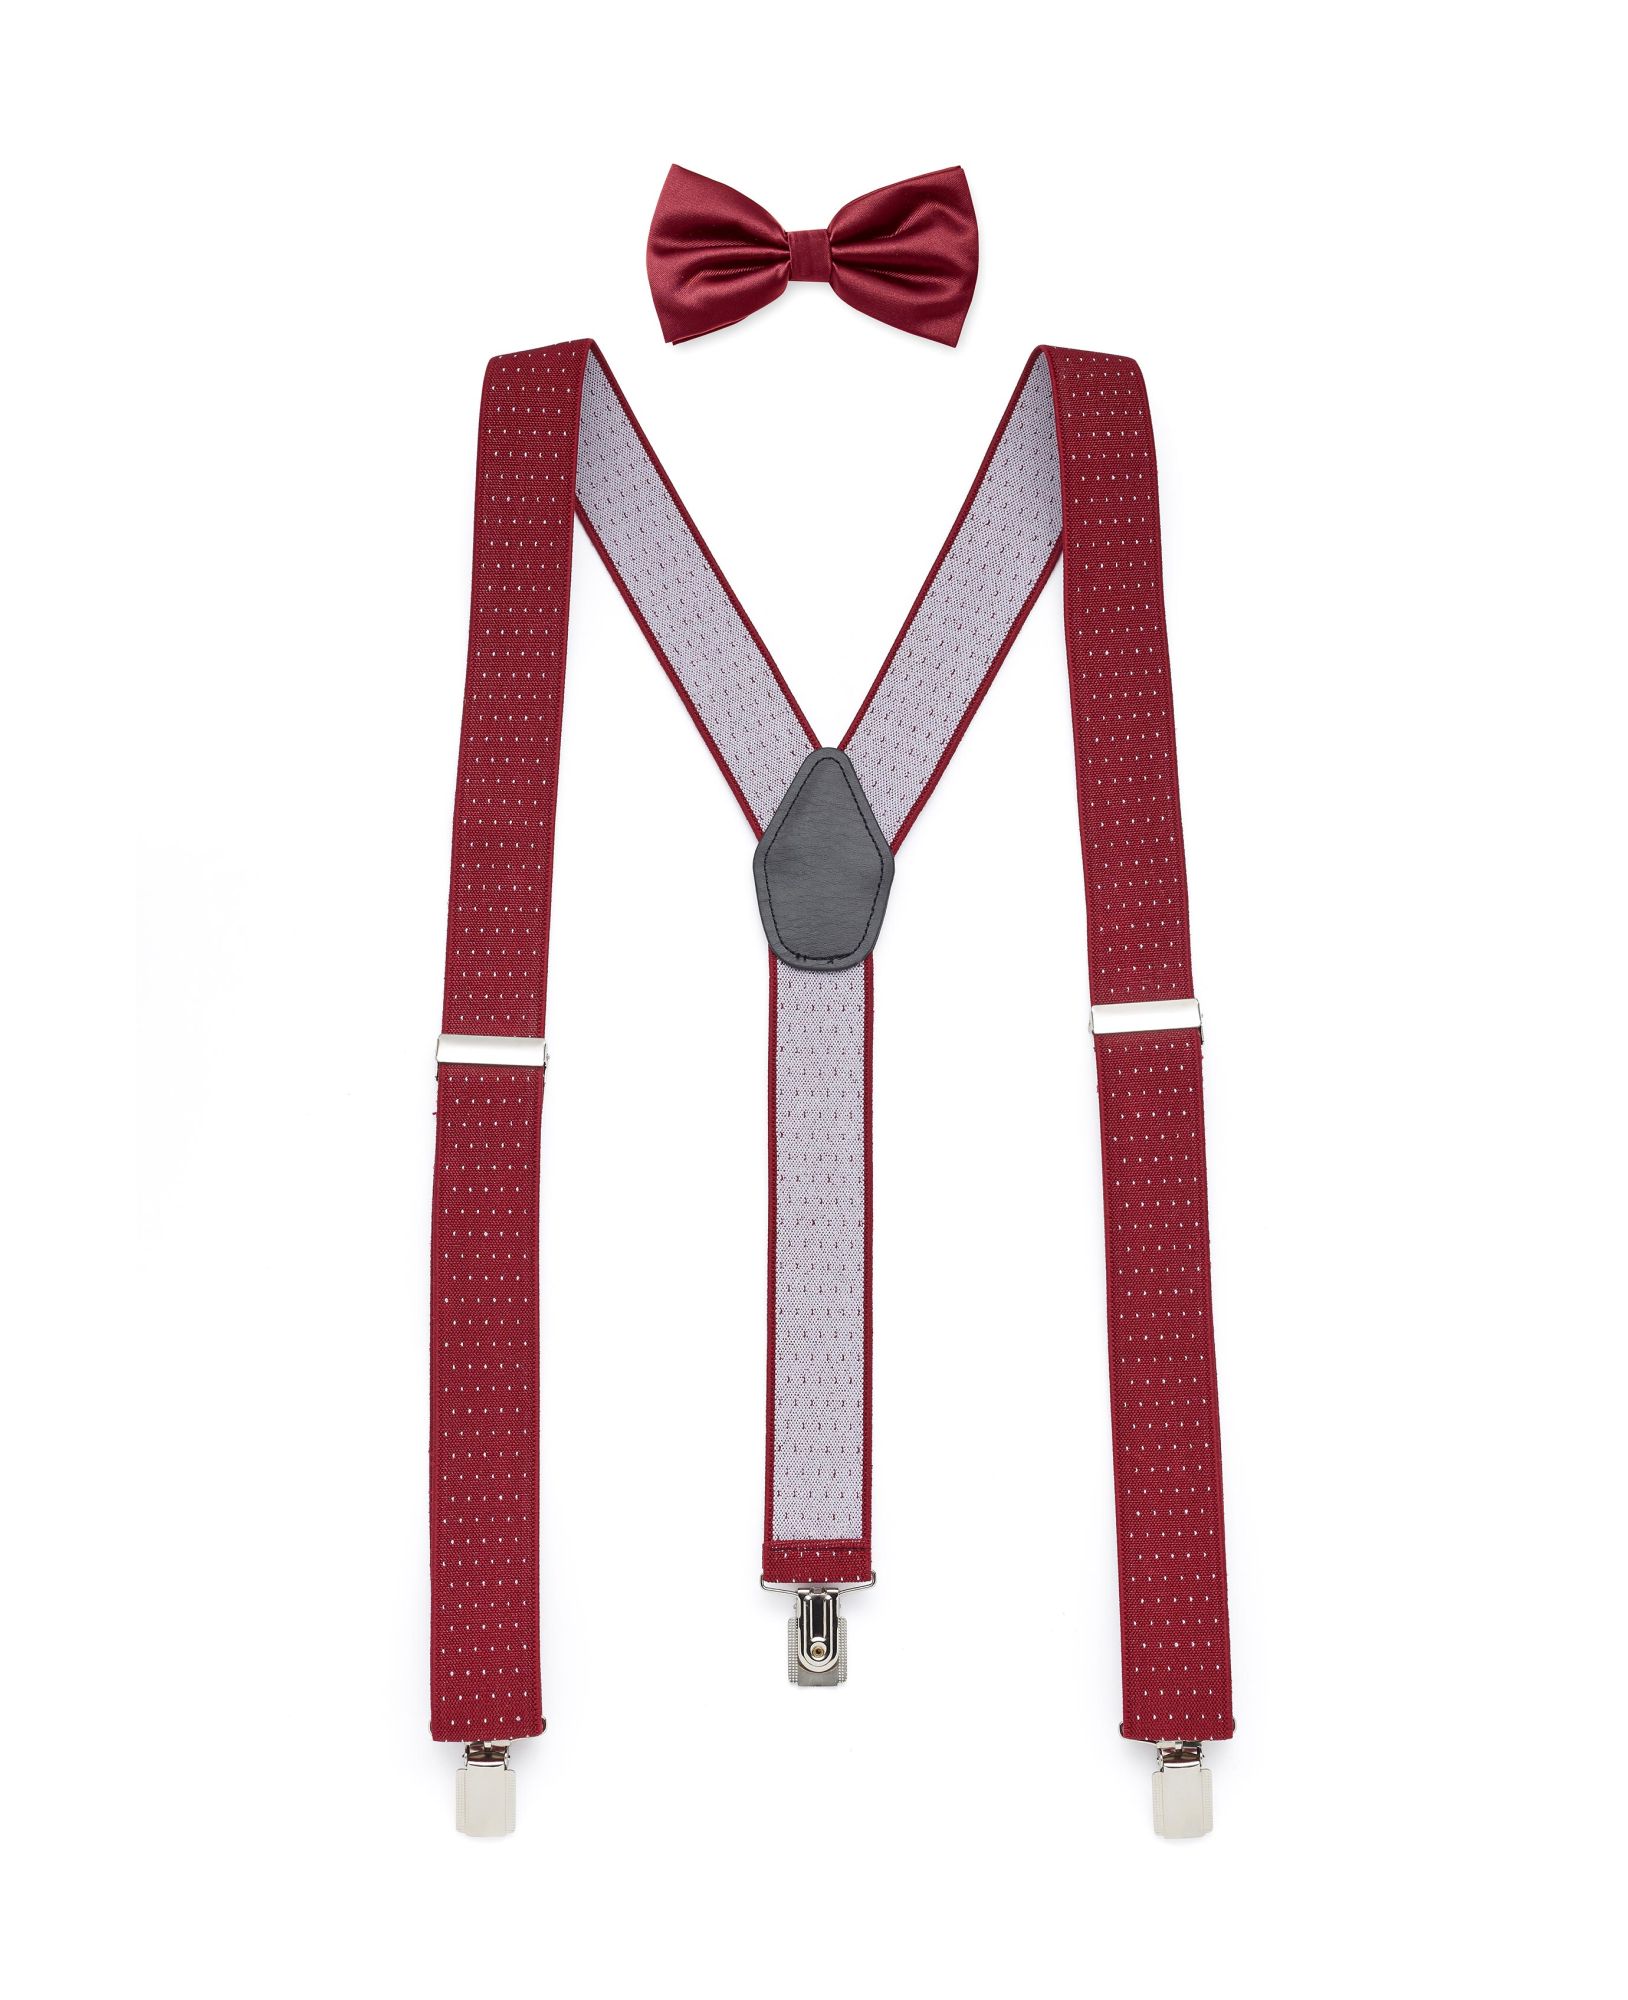 Image of Burgundy Spotted Braces & Bow Tie Set